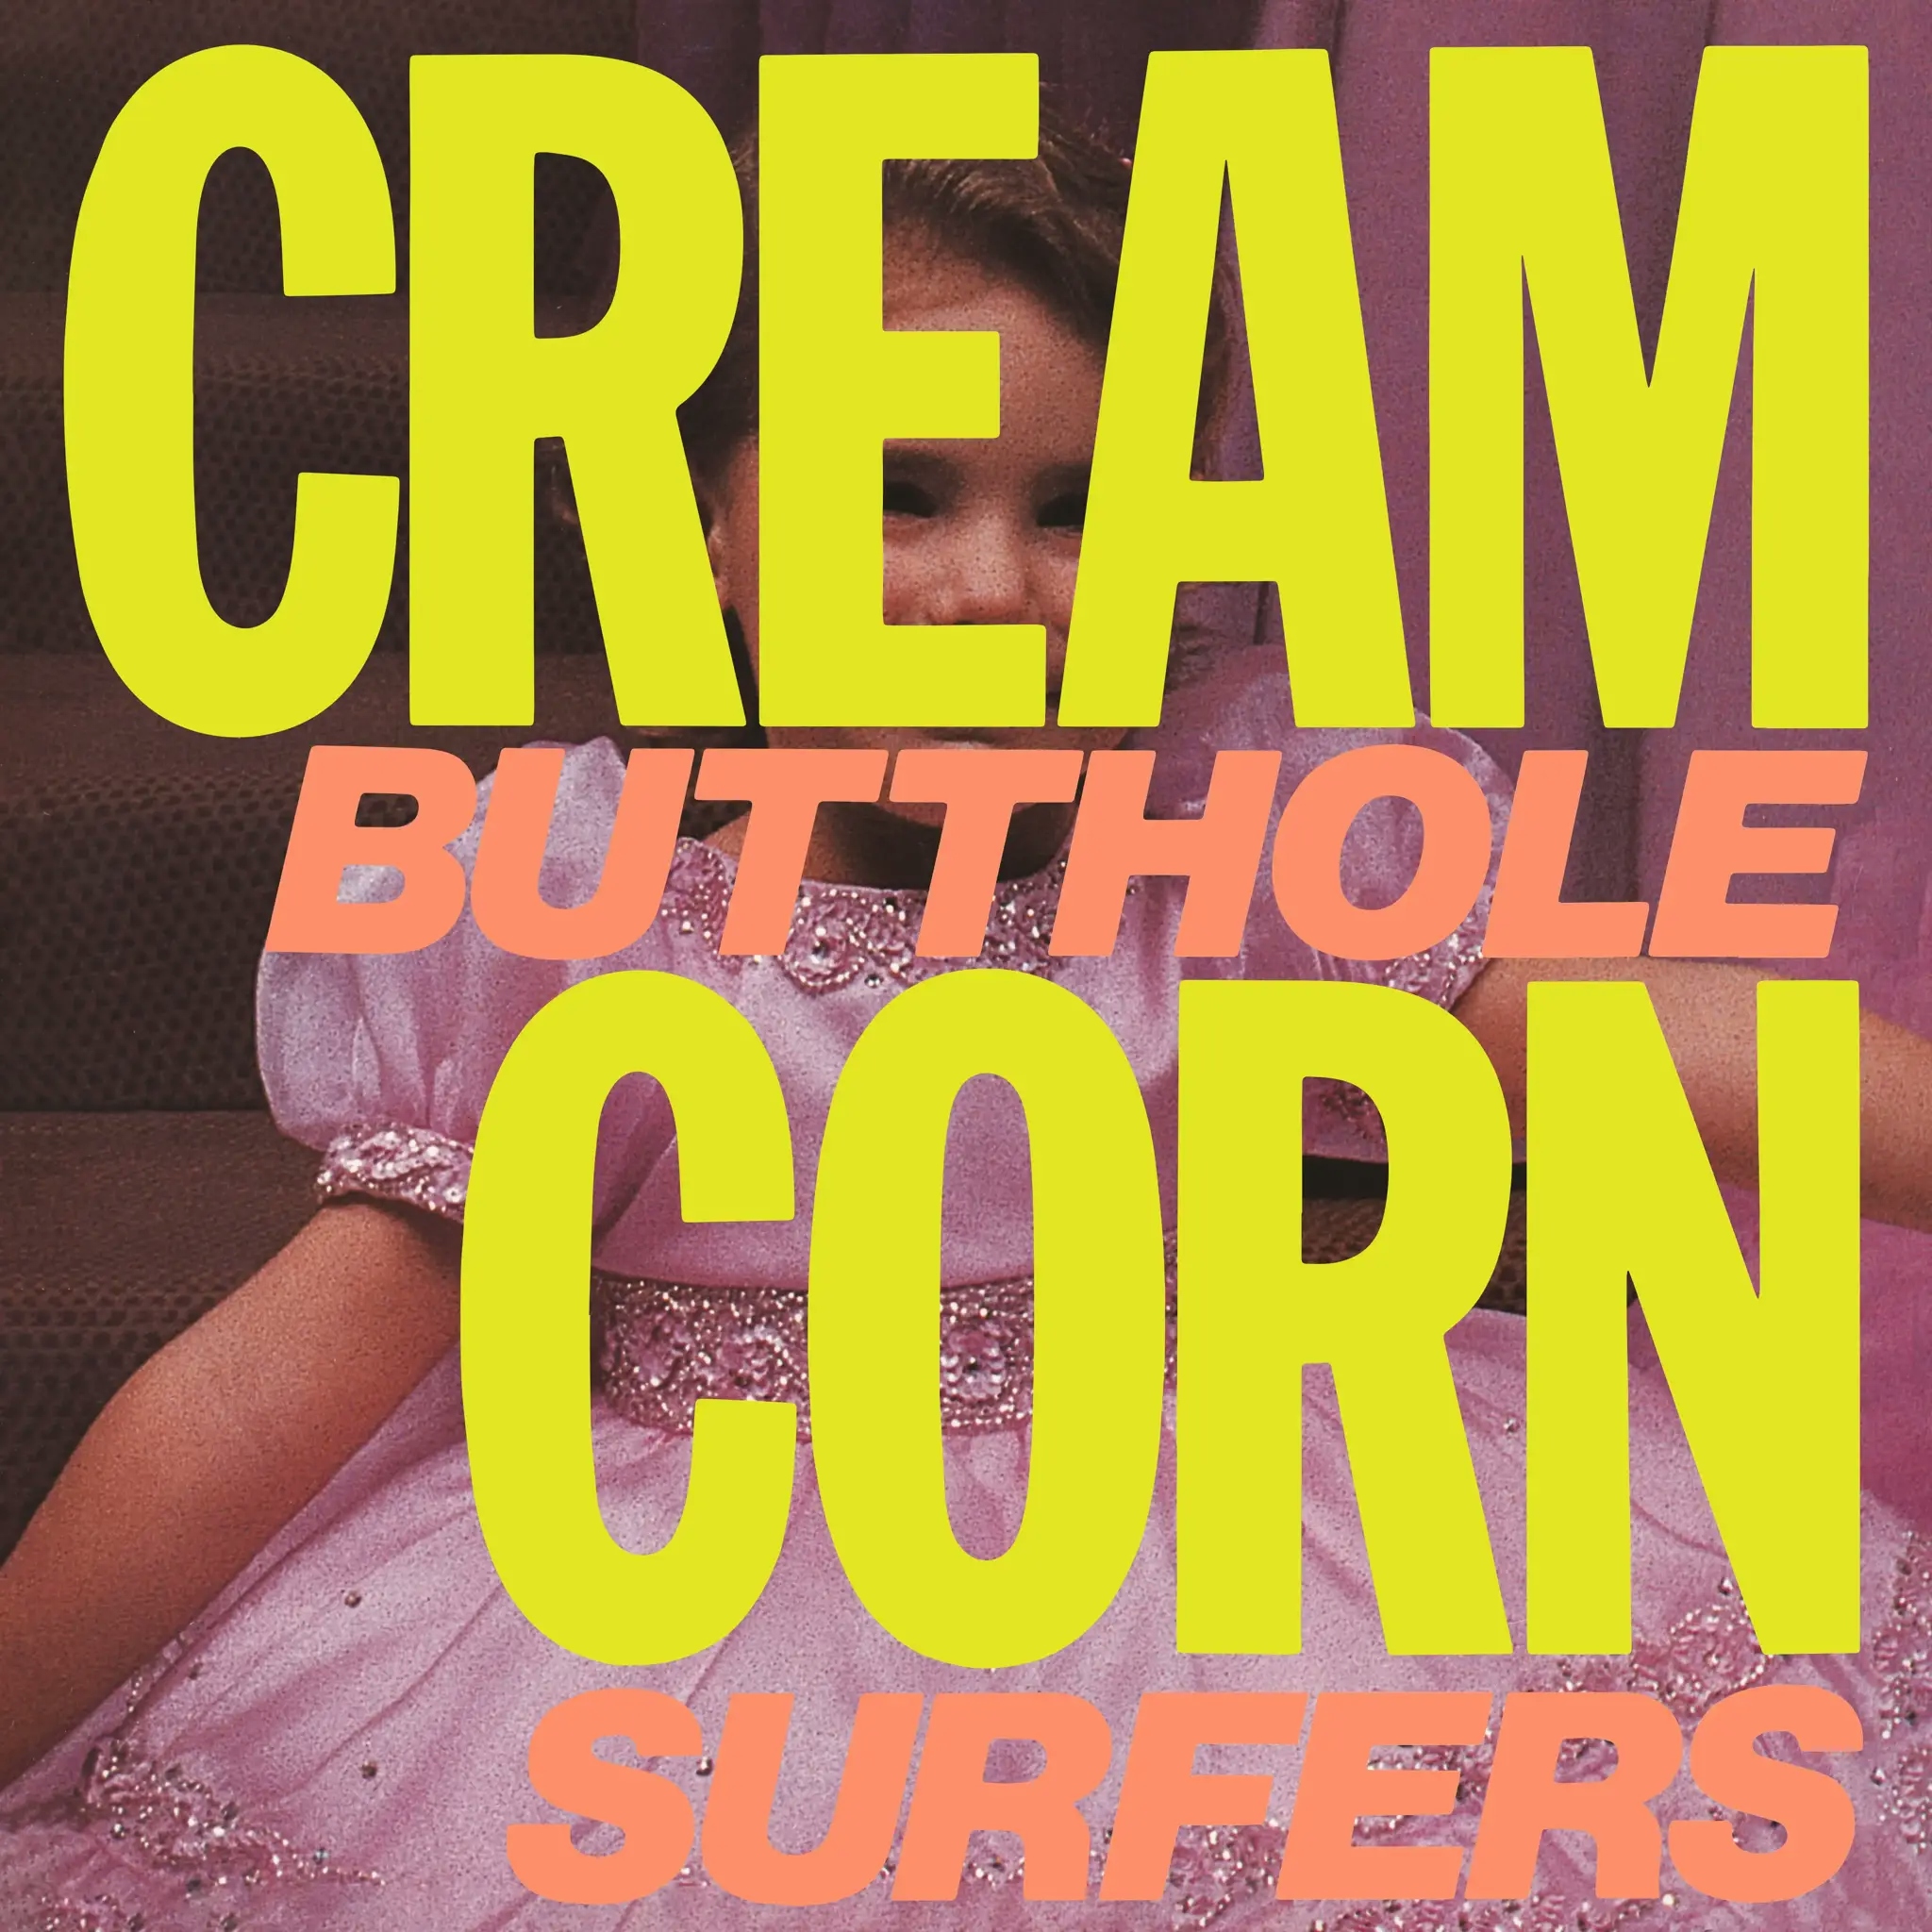 Album artwork for Cream Corn from the Socket of Davis by Butthole Surfers